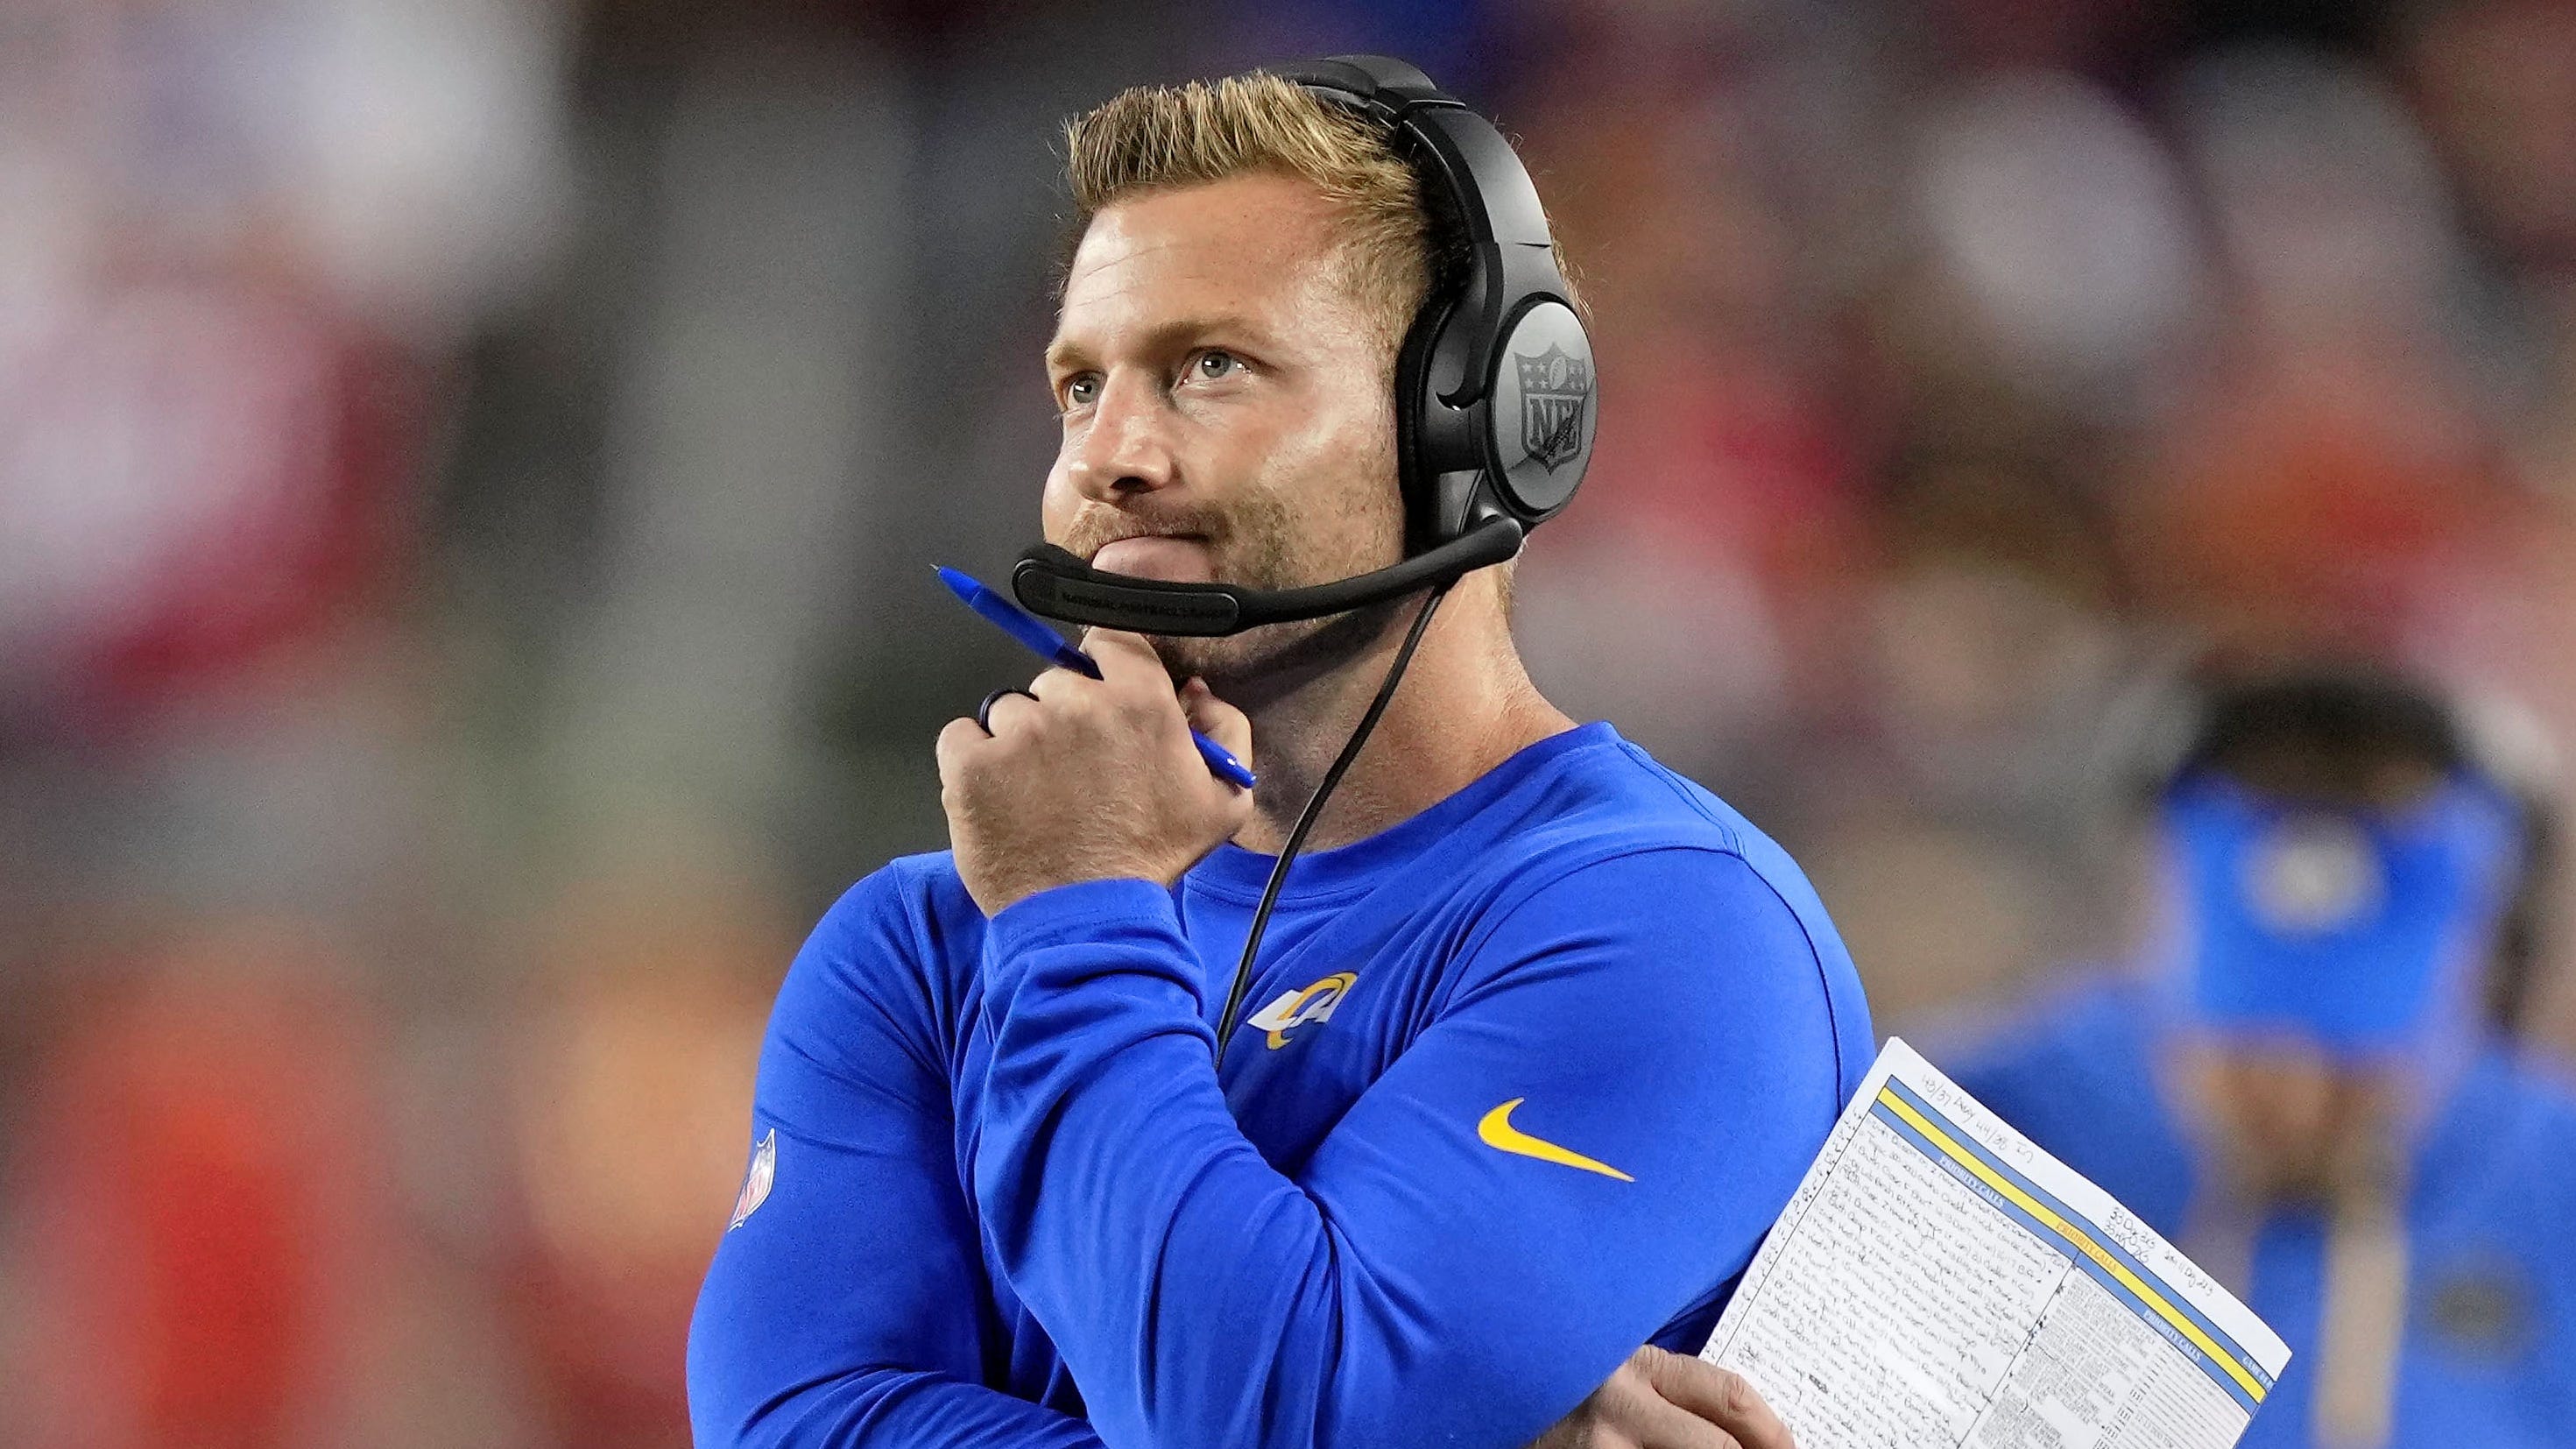 velstand Afsnit Rodeo Sean McVay gets hit in the face by his own player